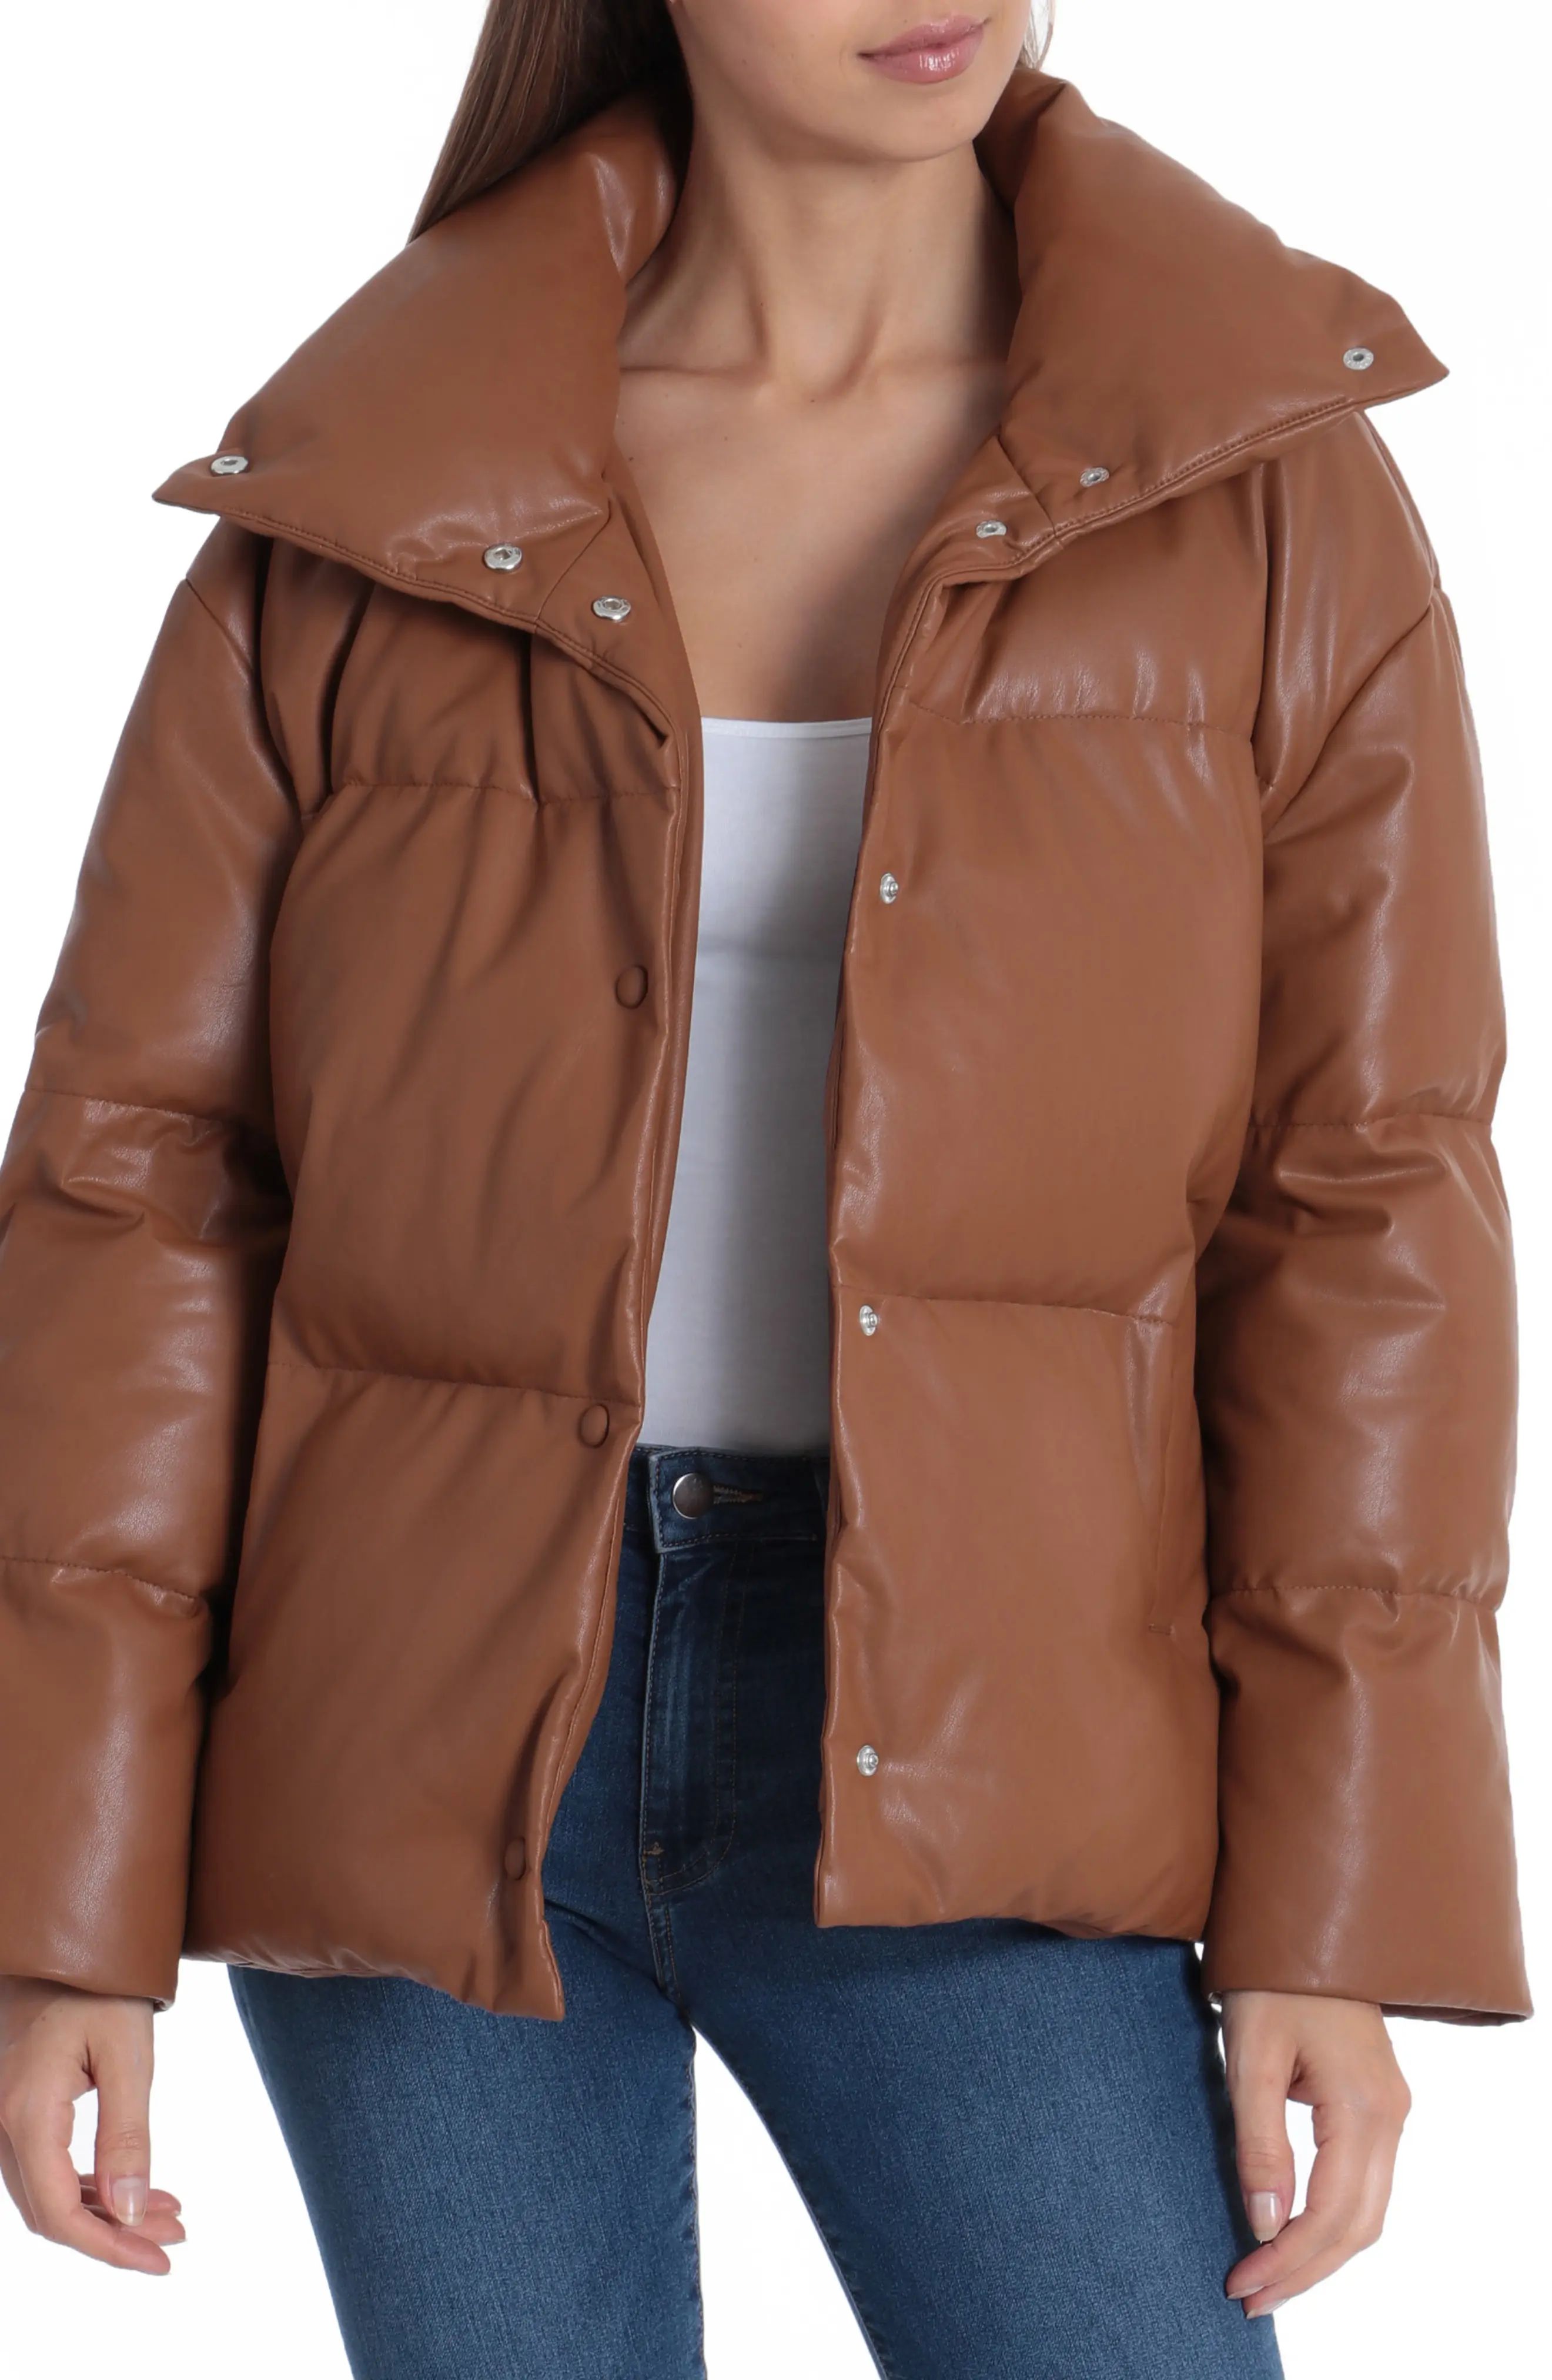 Women's Bagatelle Faux Leather Puffer Jacket, Size Medium - Brown | Nordstrom